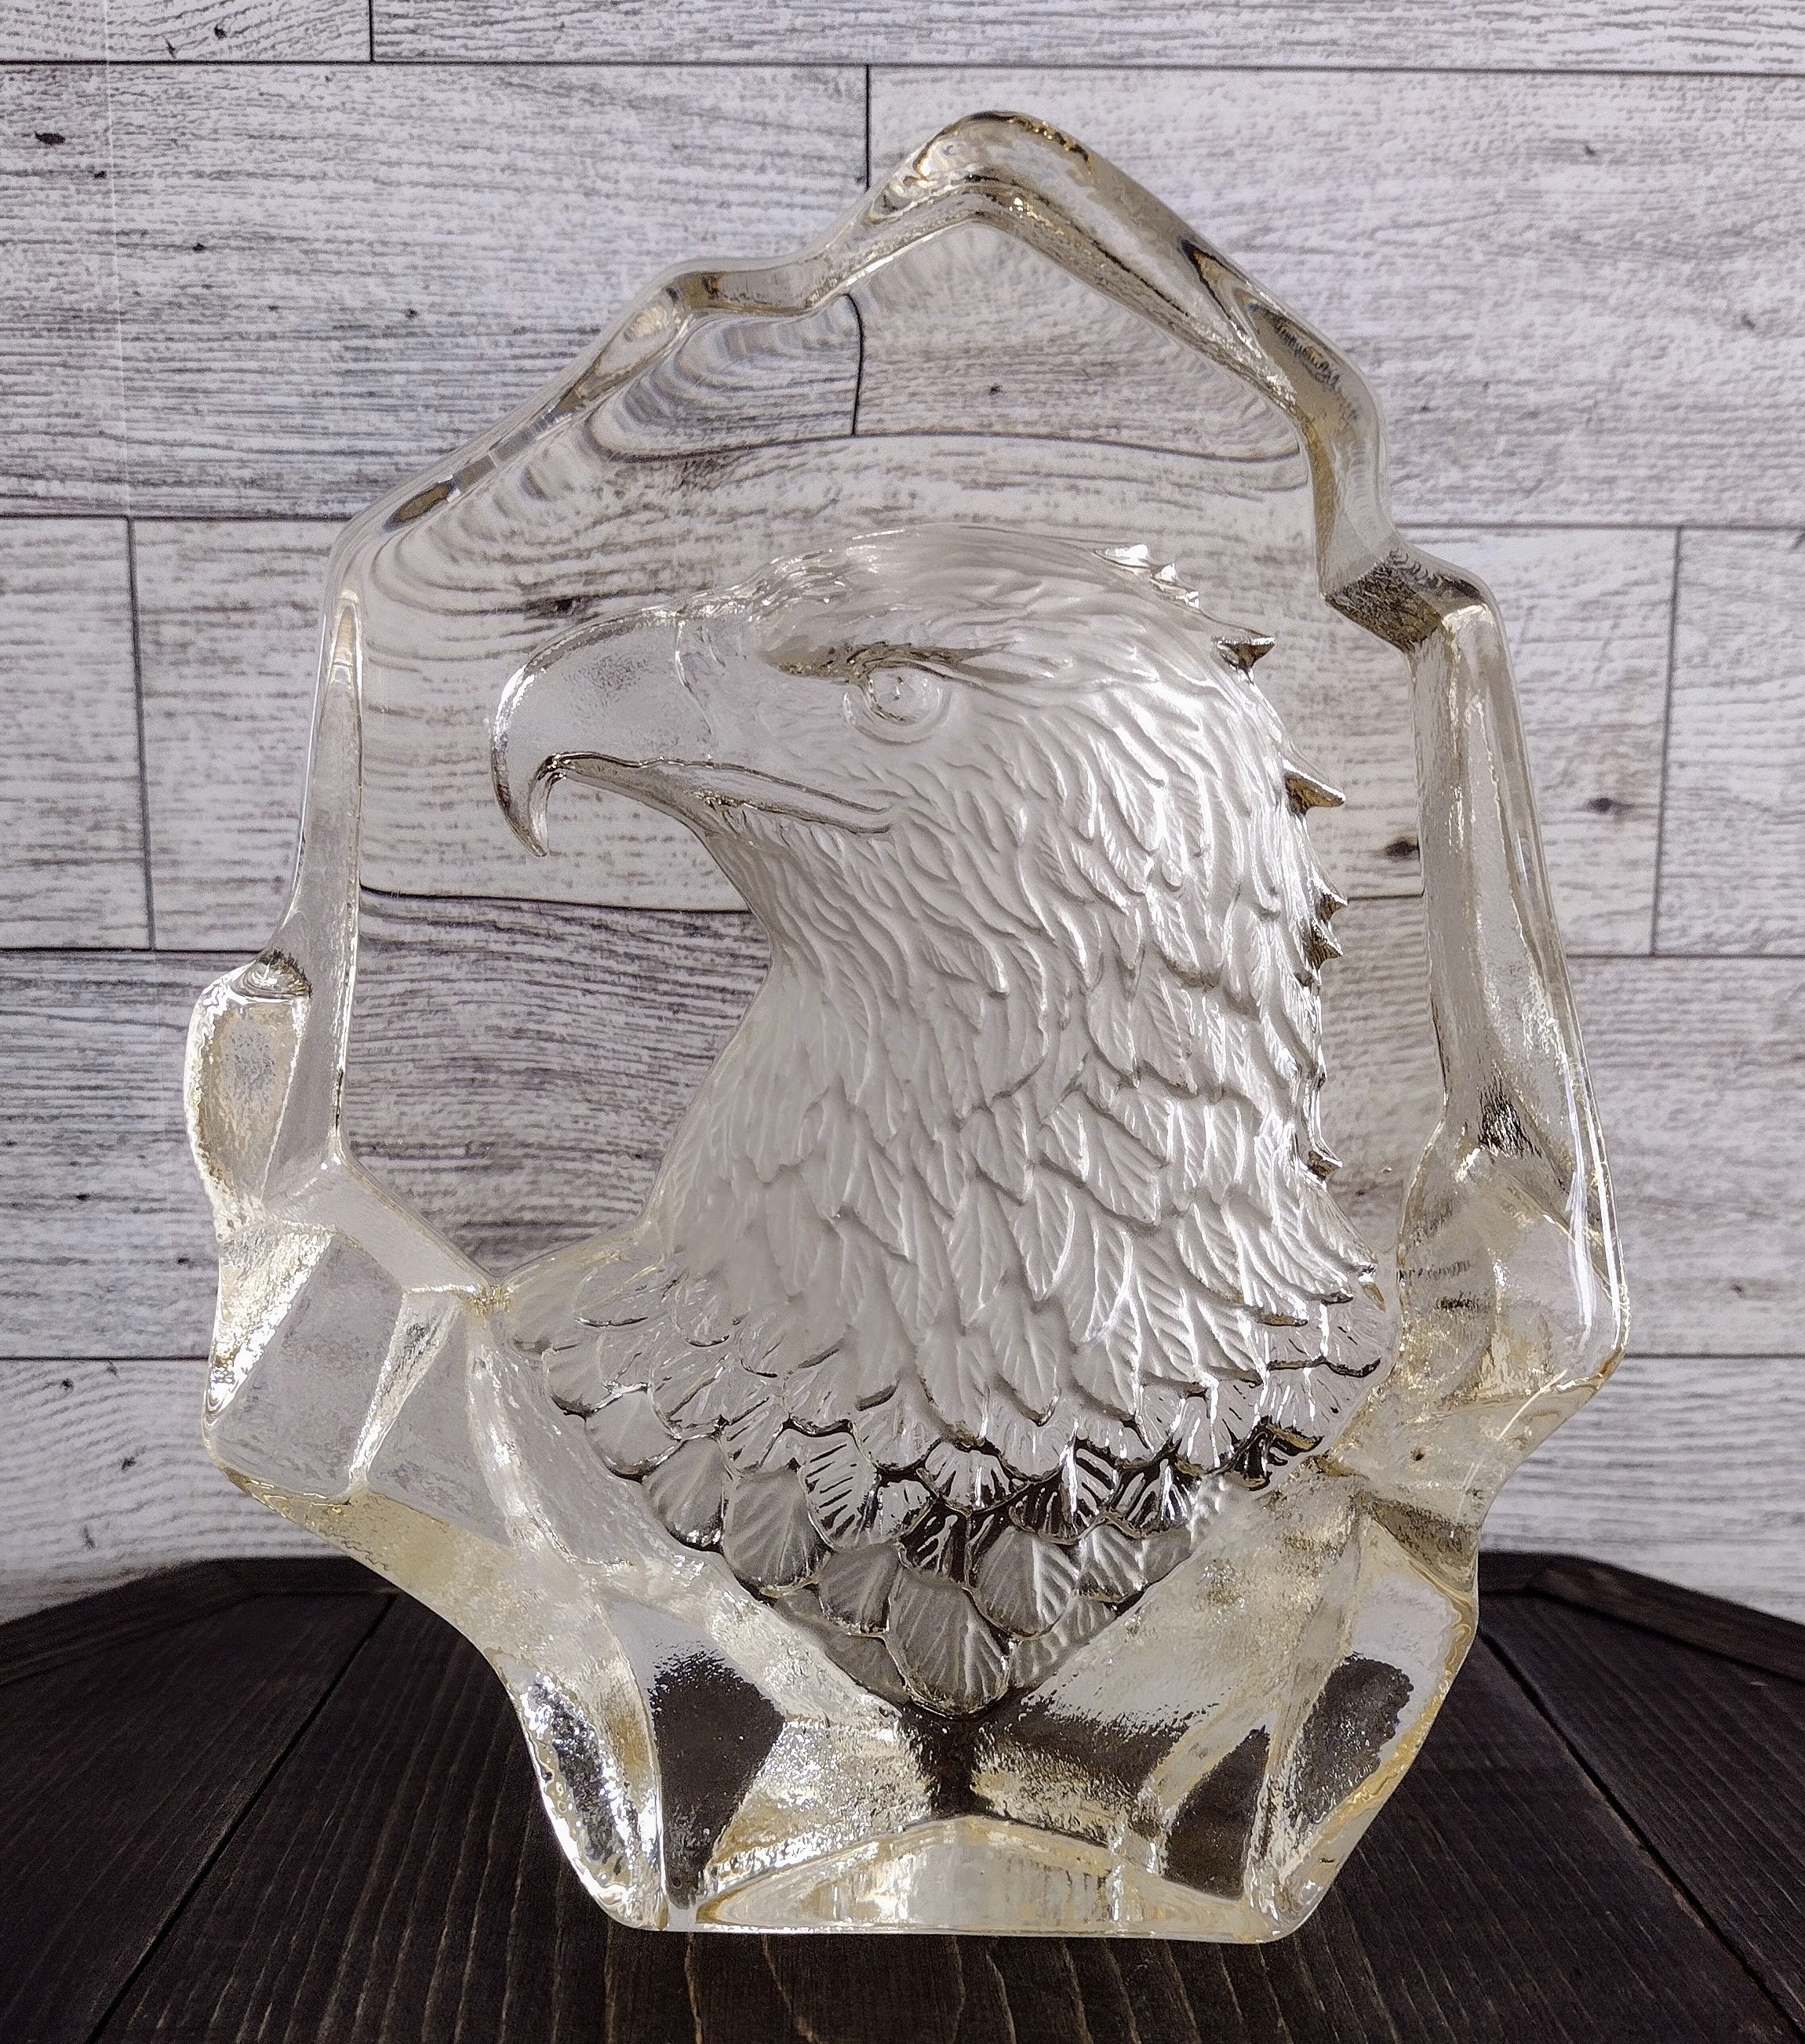 Eagle Figurine of Hand Blown Glass on Amethyst Crystals オブジェ、置き物